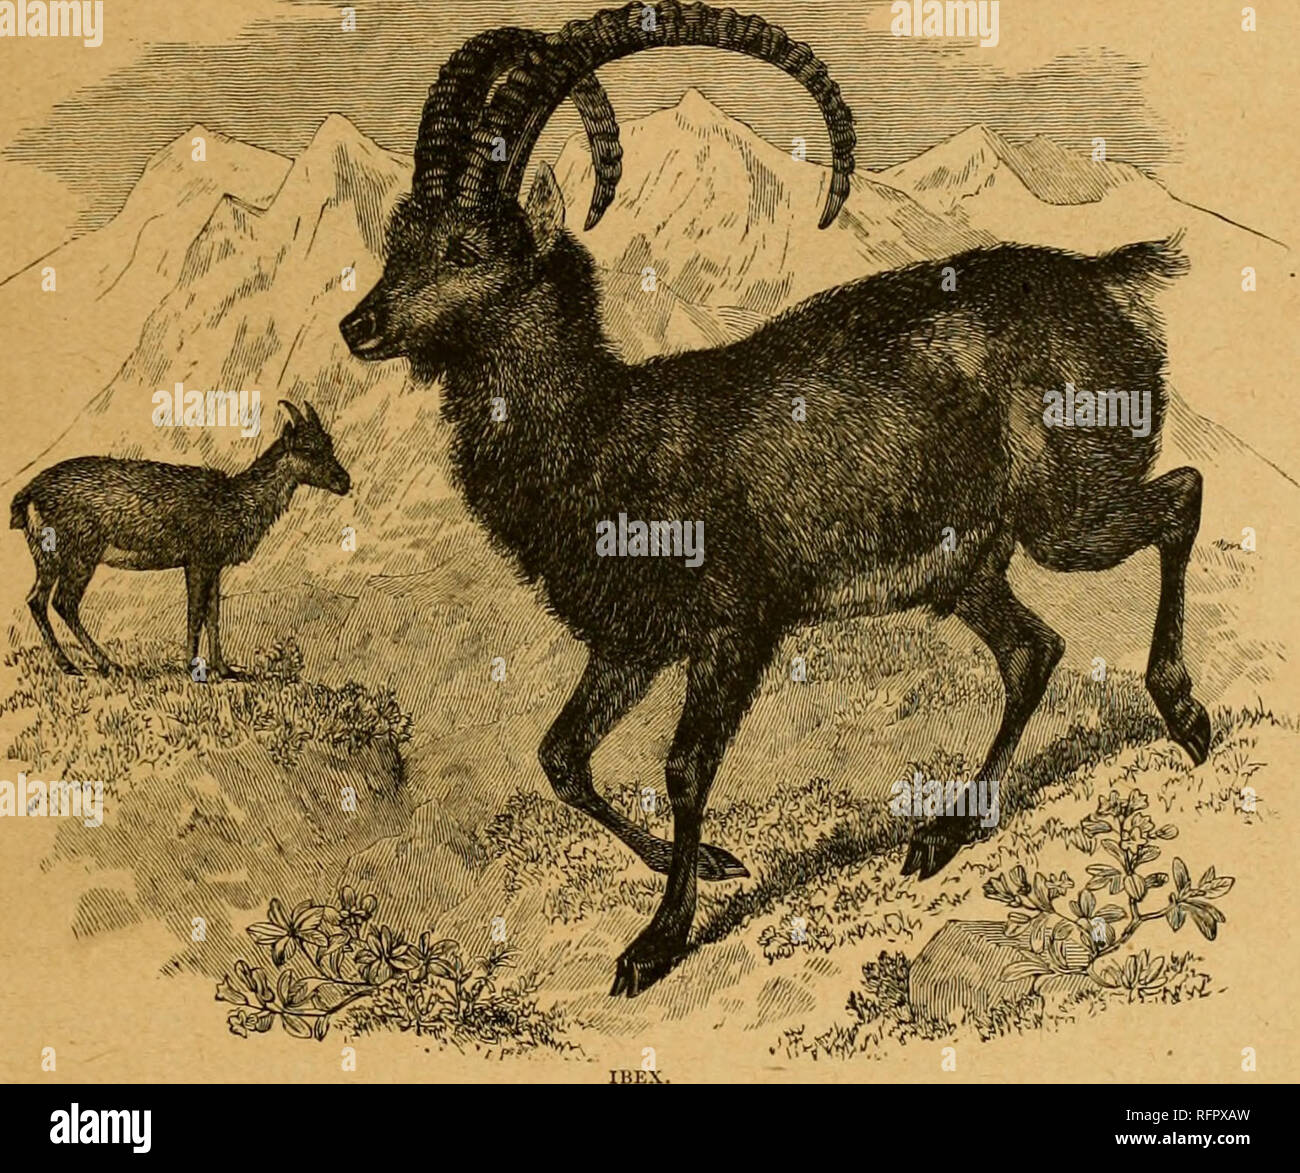 Cassell's natural history. Animals; Animal behavior. THE IBEX .lyi)  . U districts. V'arieties occur with large pendulous instead of  upright ears ; others with exti-a horns, occasionally spiral as in Nepaul,